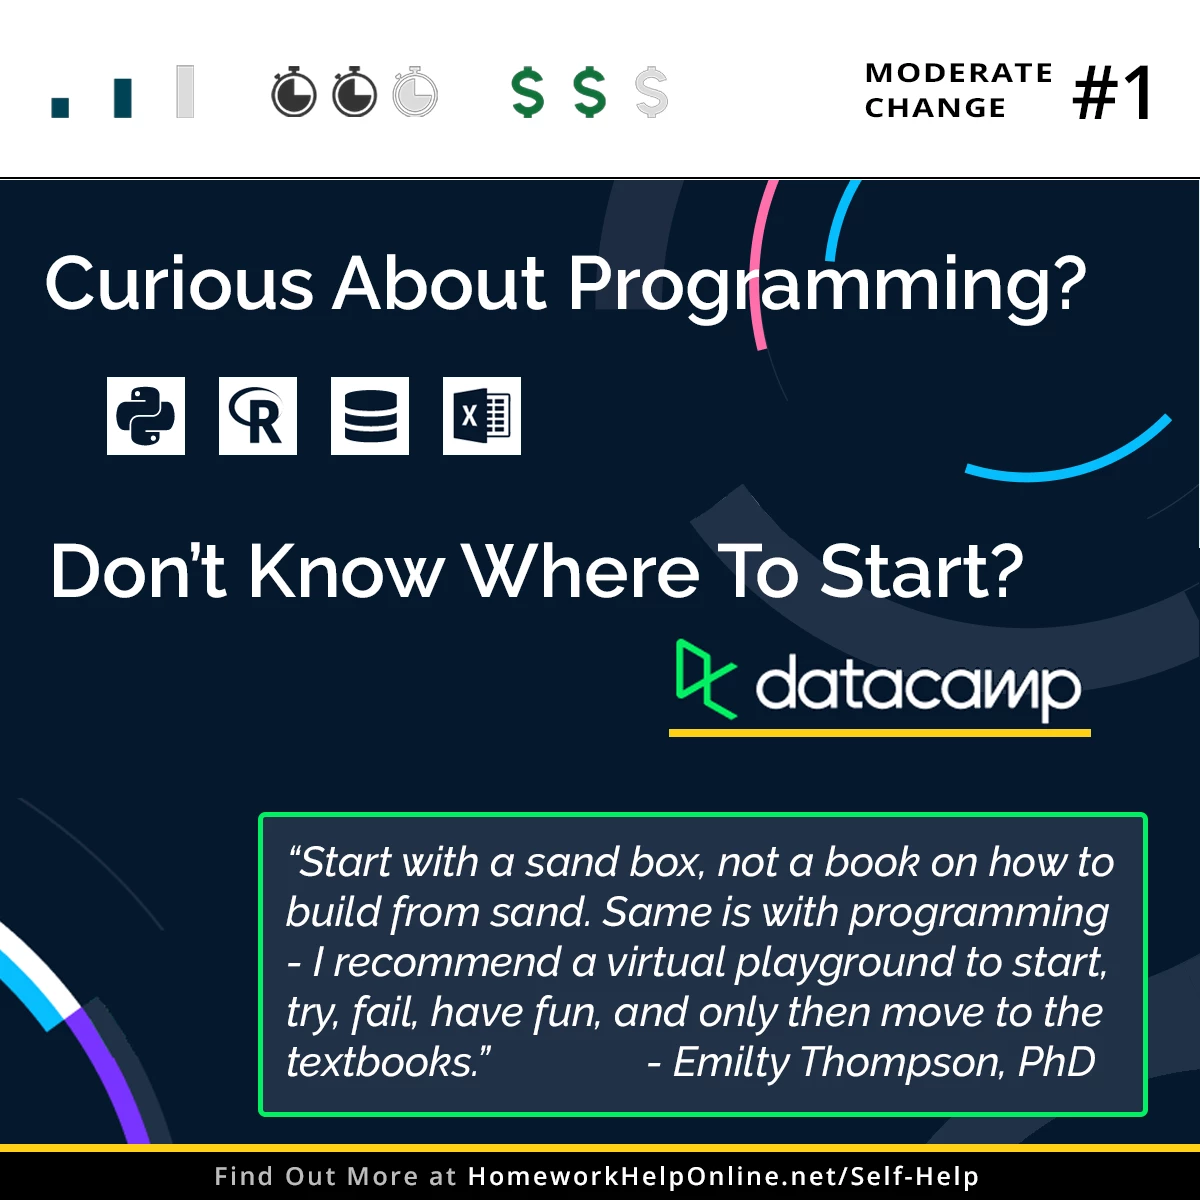 A tip for beginners on where to start programming without textbooks.